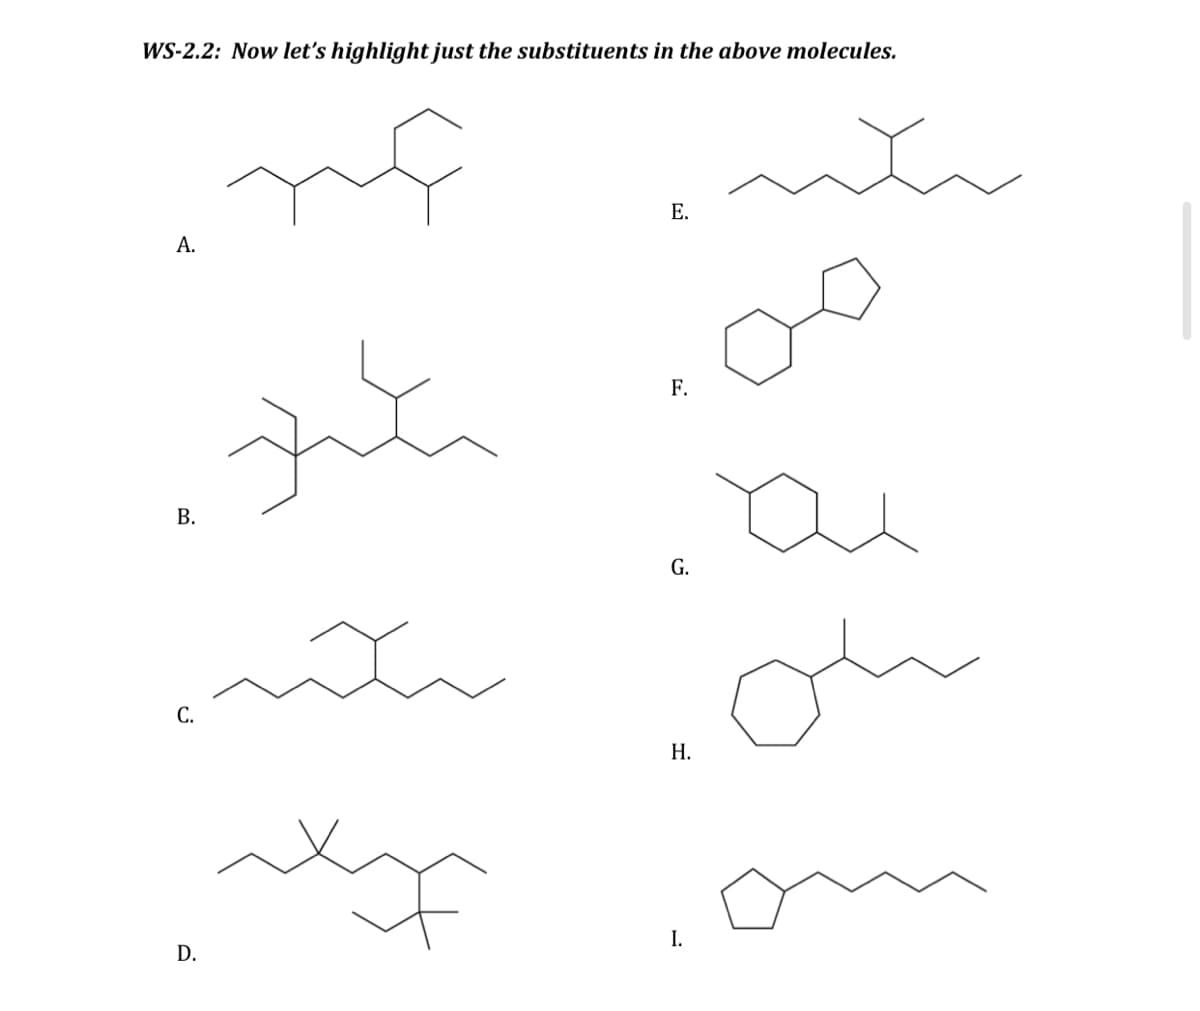 WS-2.2: Now let's highlight just the substituents in the above molecules.
A.
B.
inte
C.
zit
D.
E.
F.
G.
H.
I.